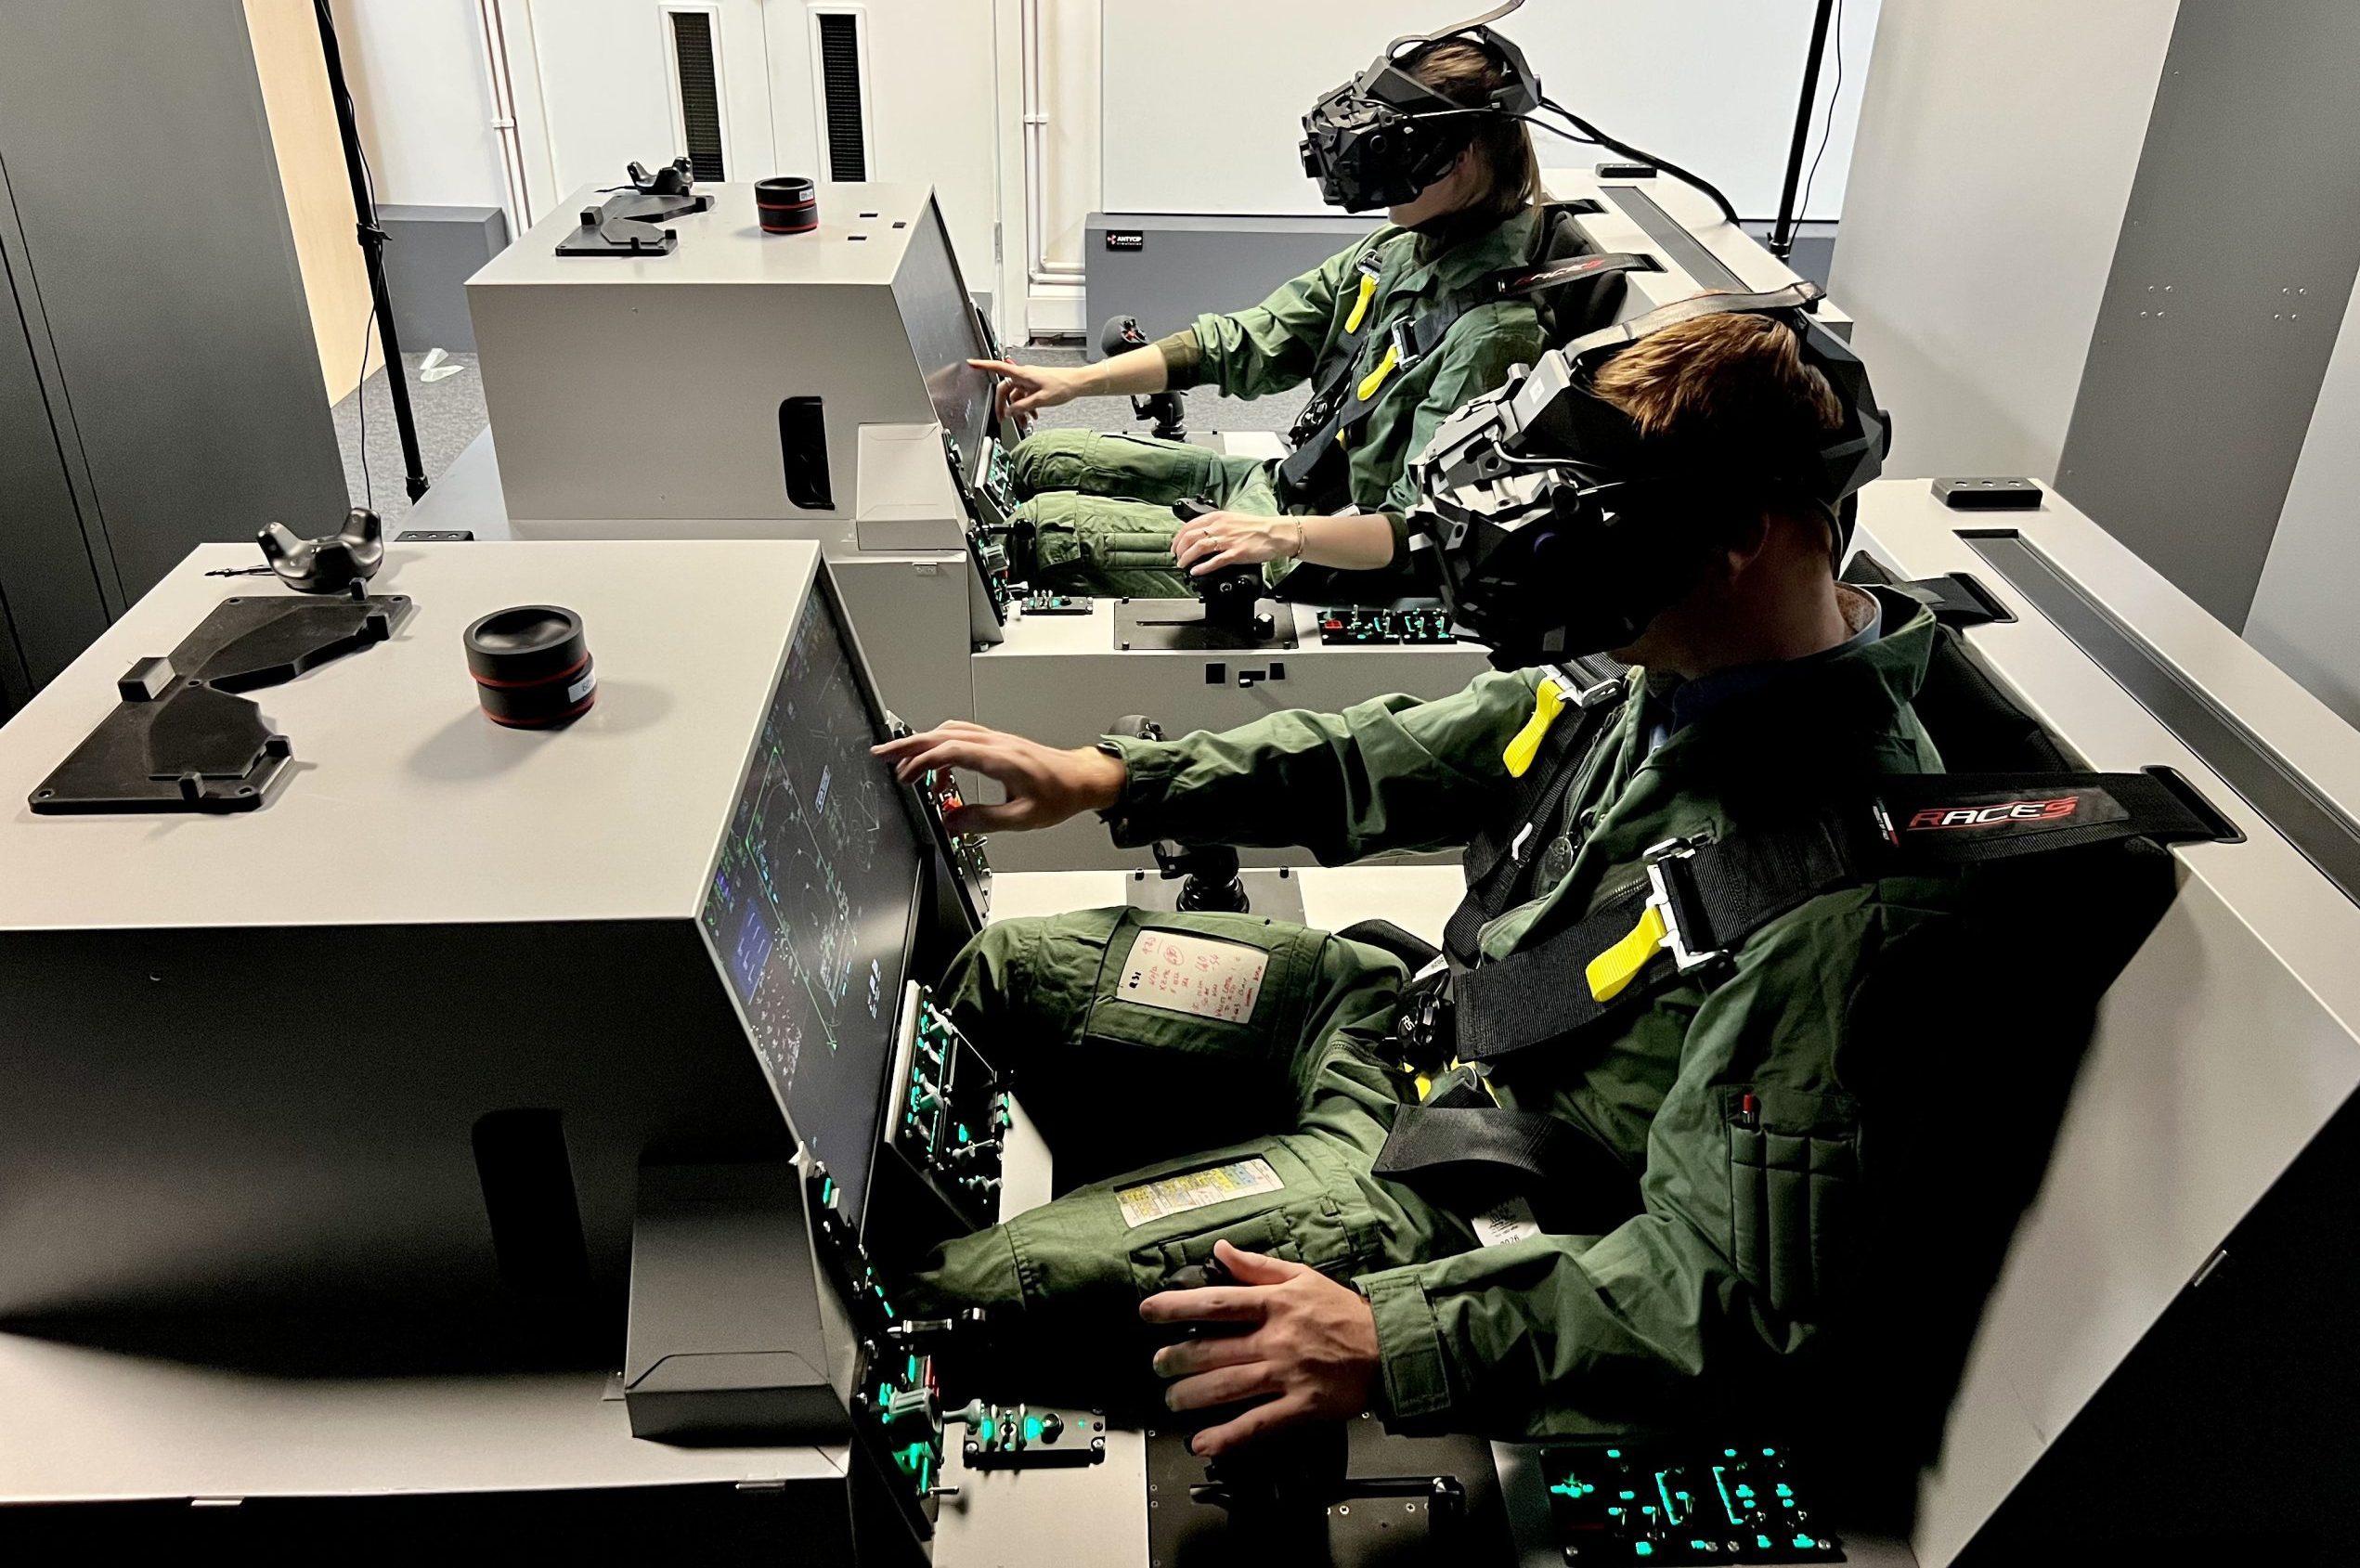 The role of virtual reality (VR) in military planning